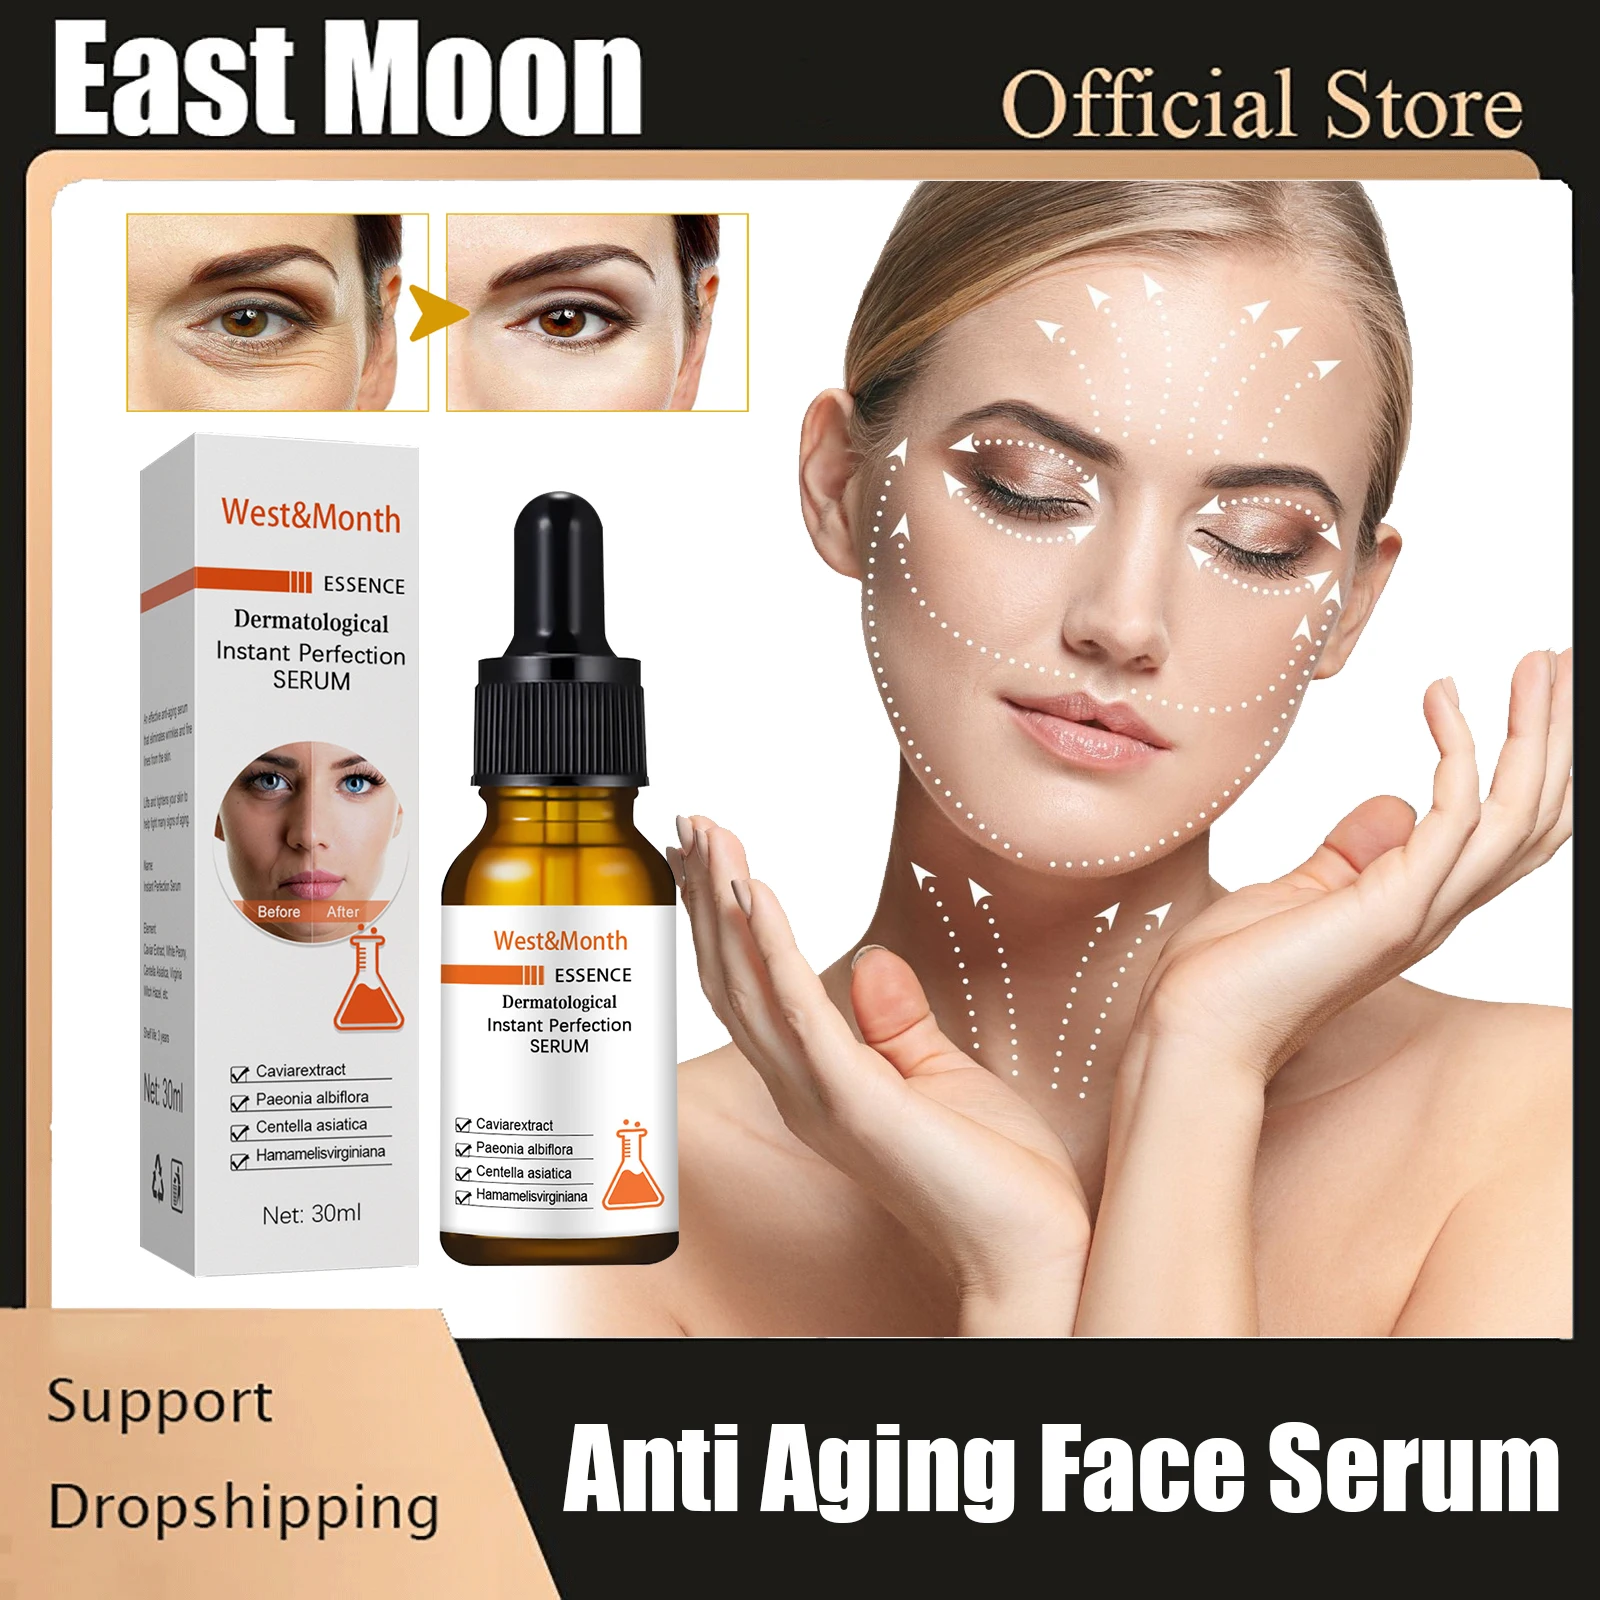 

Wrinkle Removal Serum Facial Lifting Firming Fade Fine Lines Anti Aging Face Serum Nourishing Hydrating Brightening Skin Care